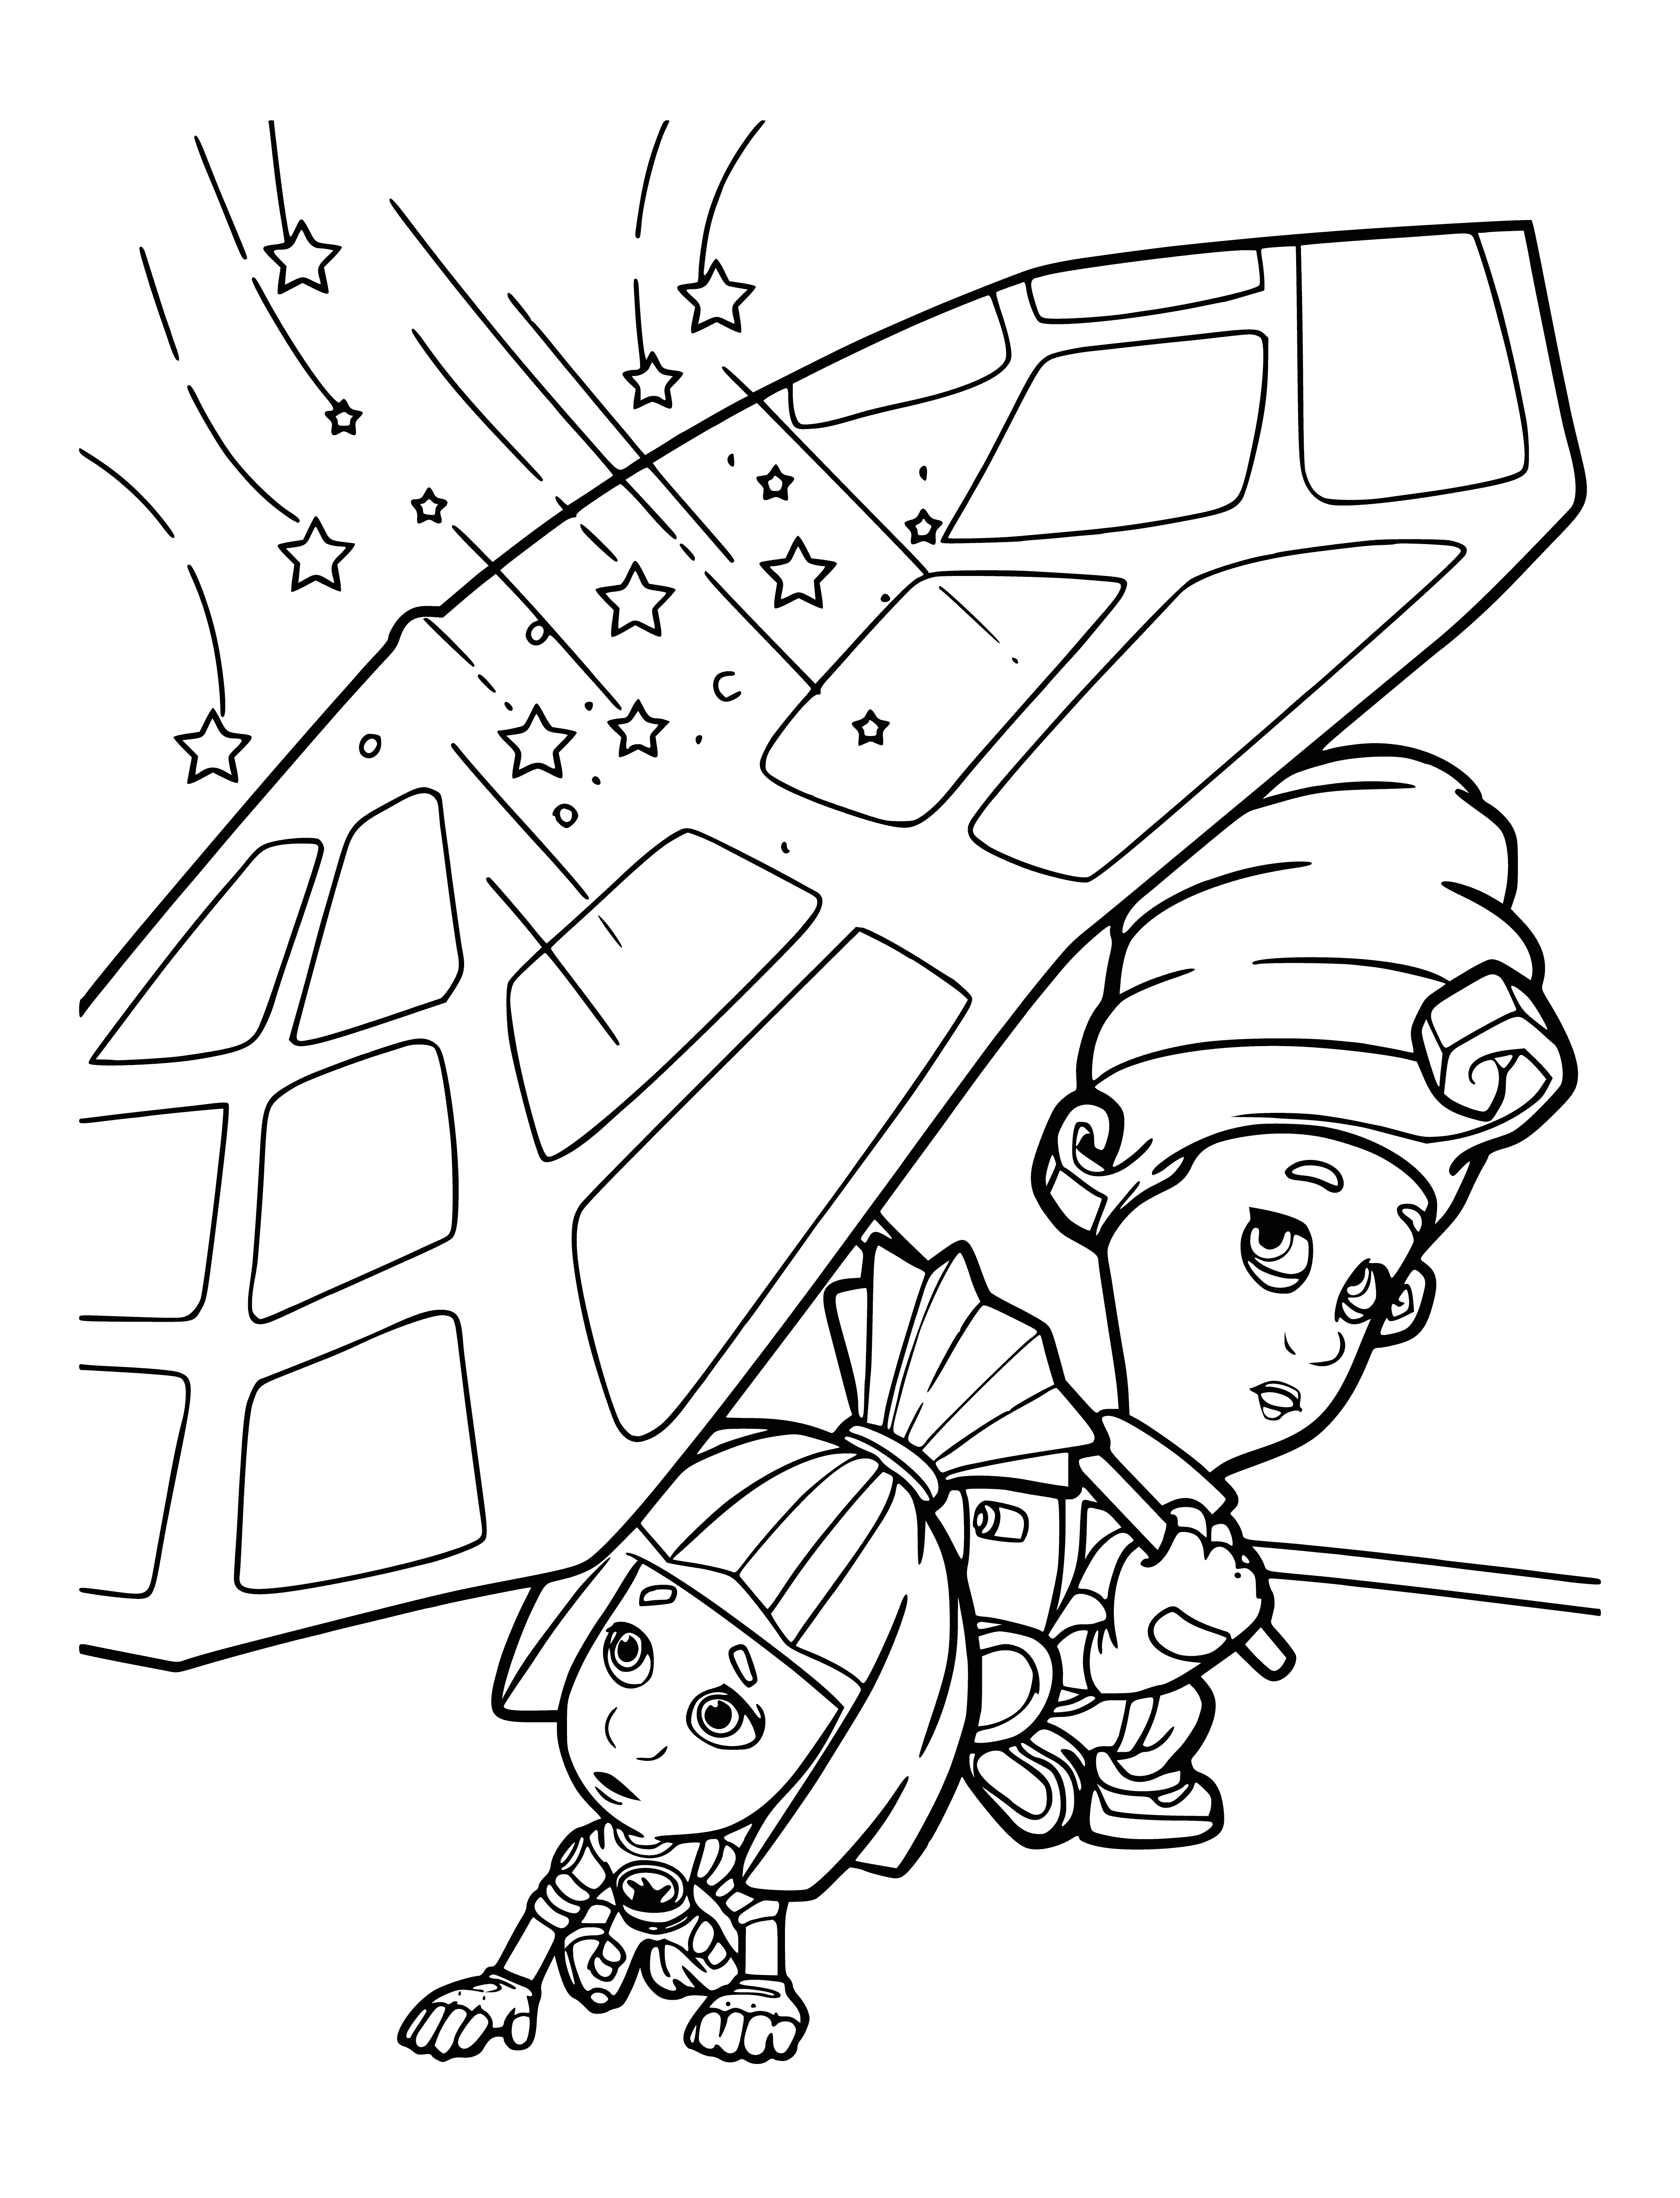 coloring page: Simka & Masya, wearing blue overalls & red accessories, hold hands & look lovingly into each other's eyes.